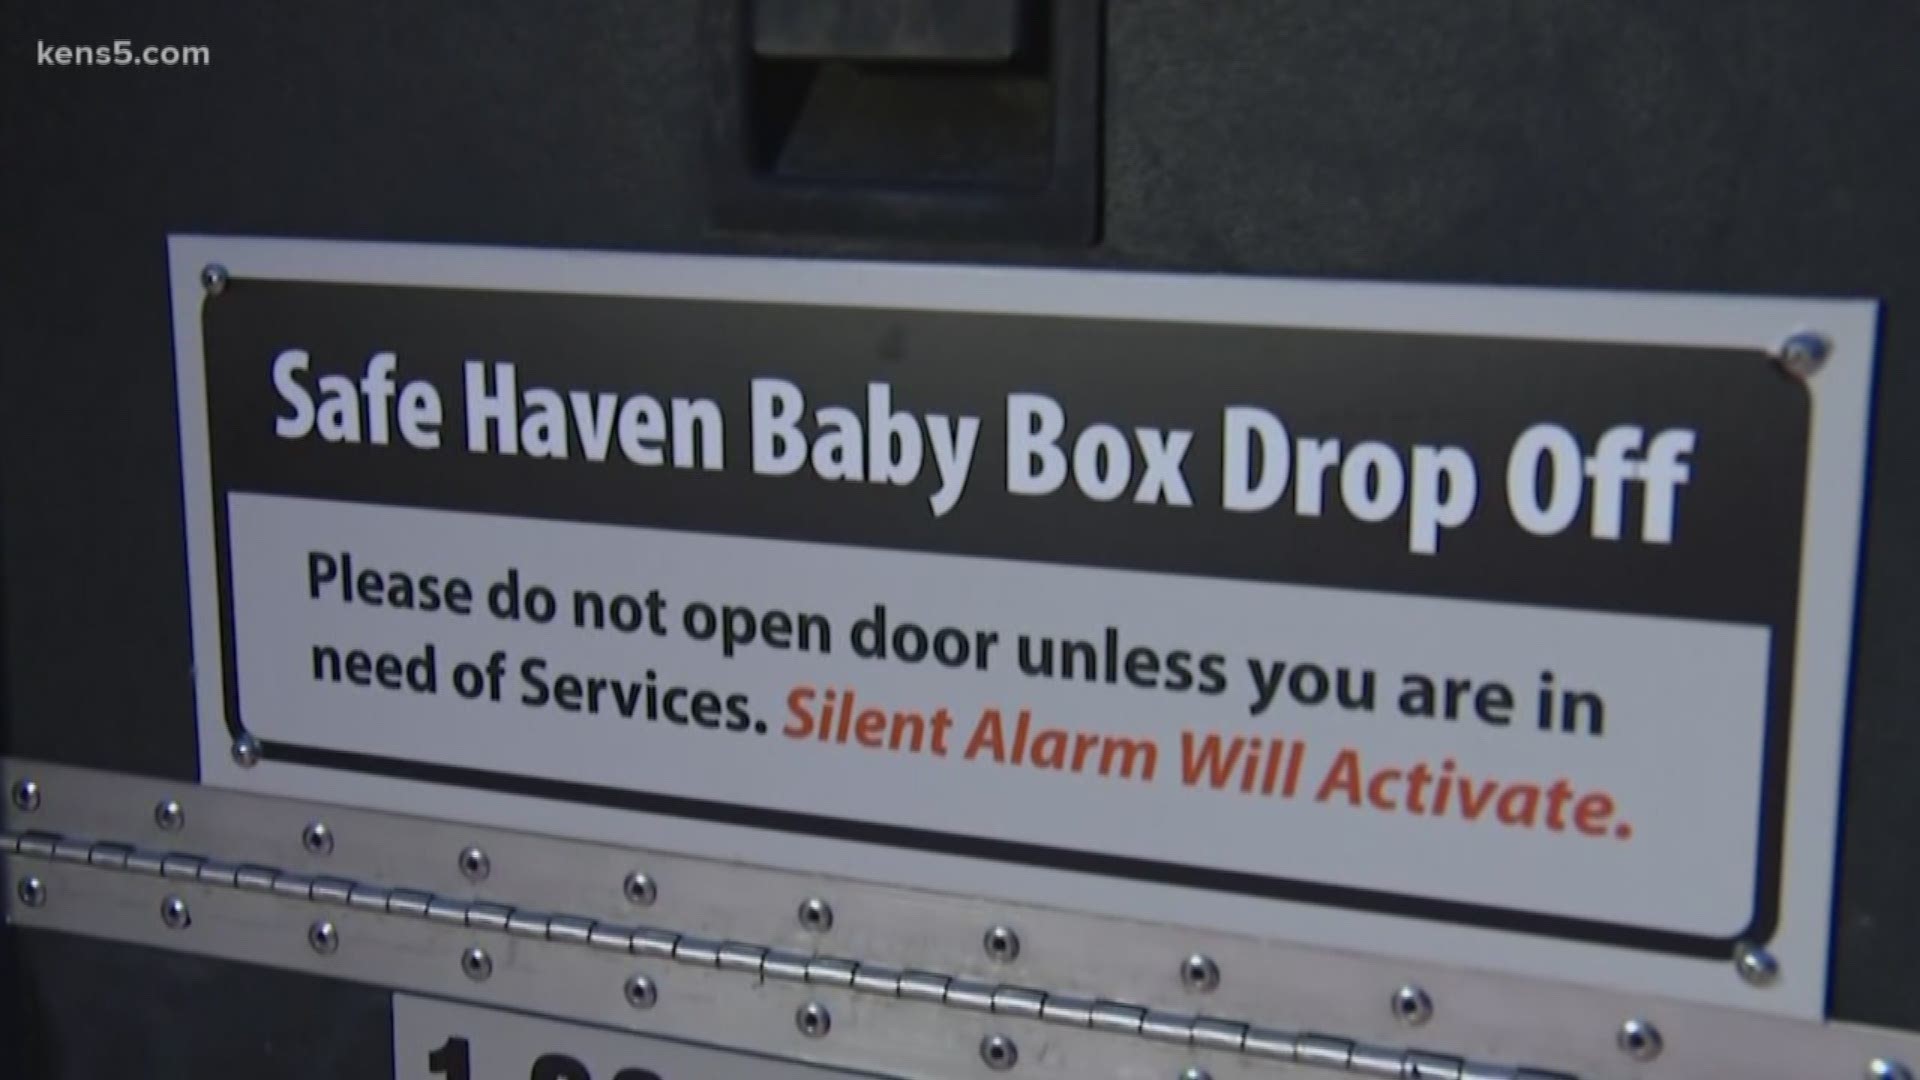 Members of a local nonprofit want to bring "Safe Haven baby boxes" to San Antonio with the intent of saving tiny lives